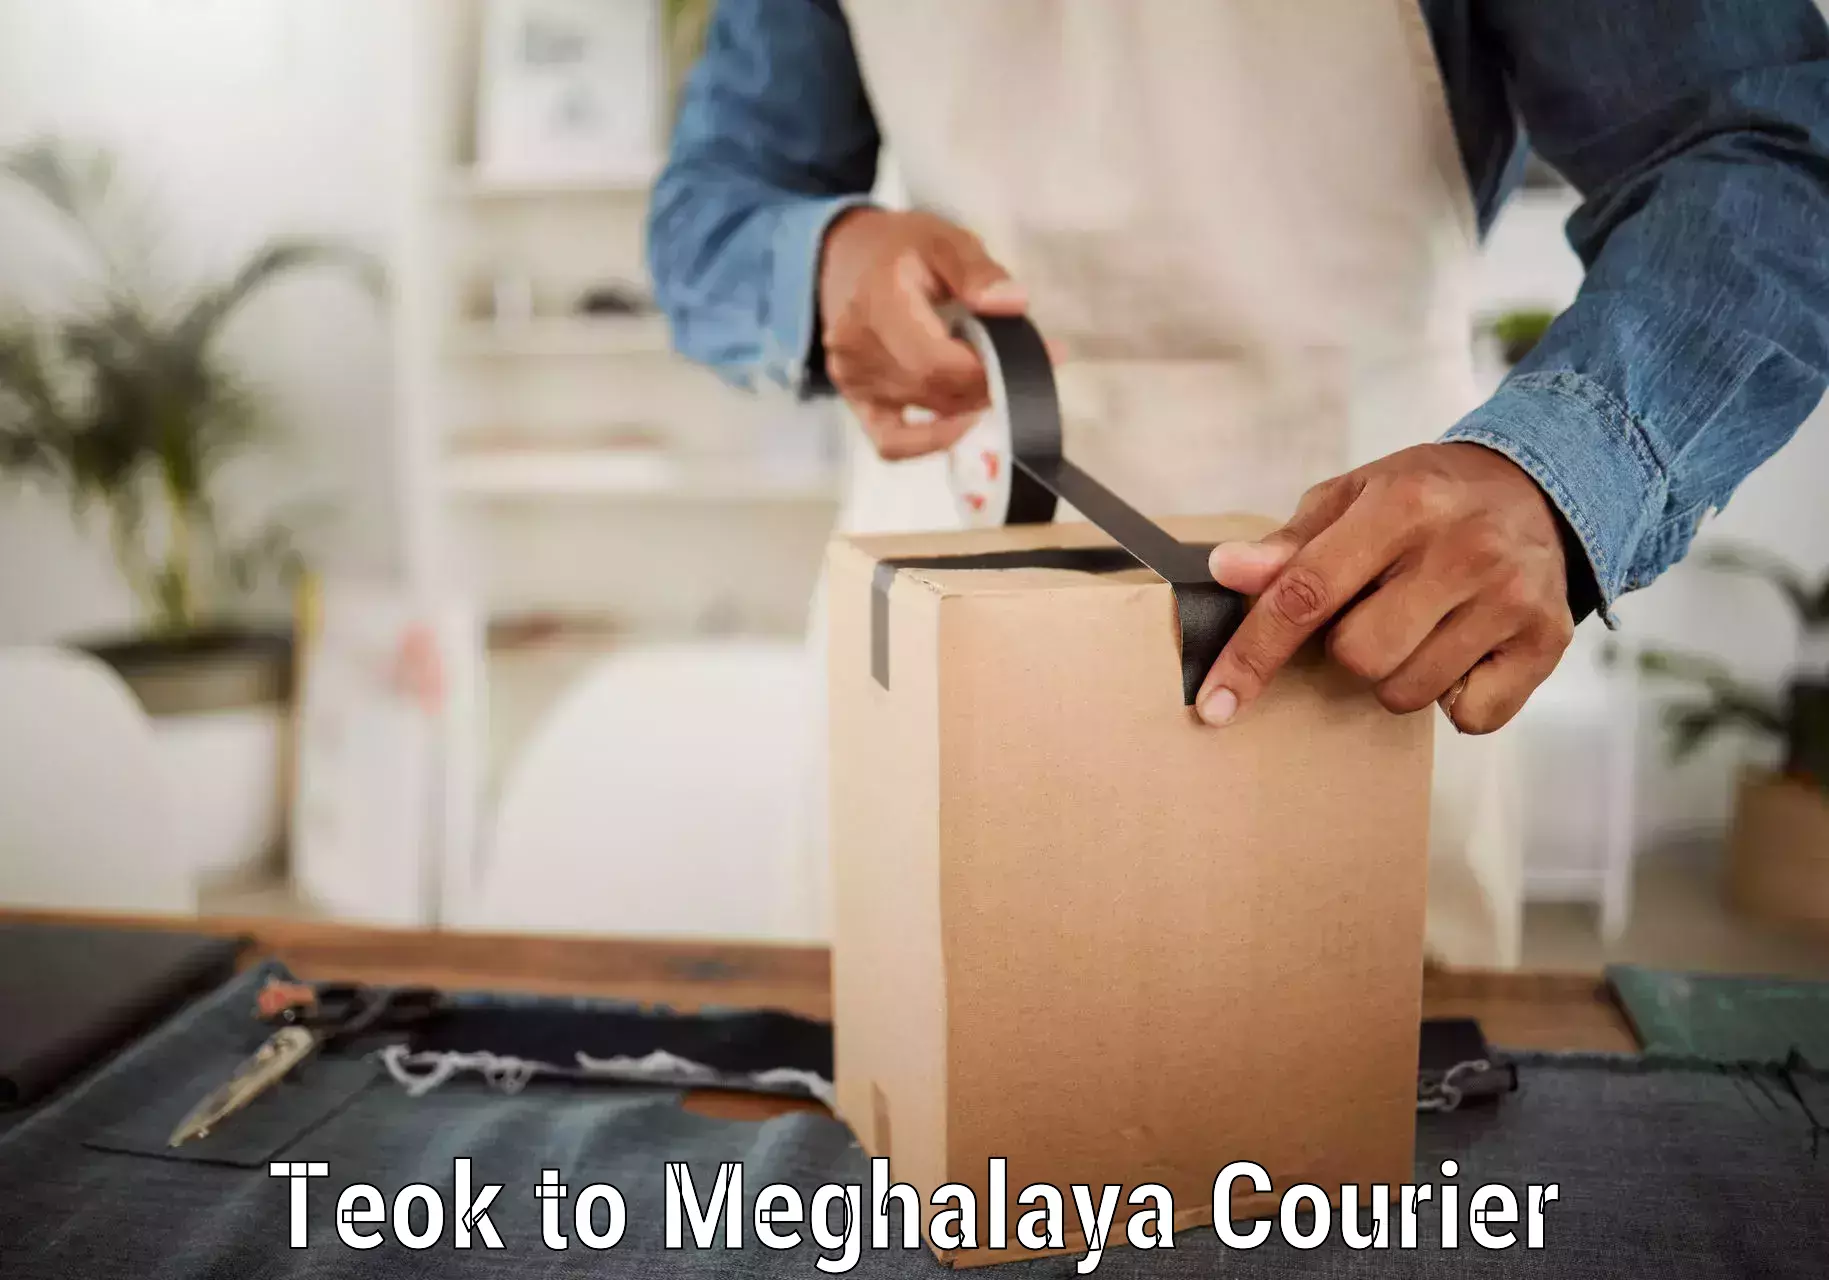 E-commerce fulfillment in Teok to Dkhiah West